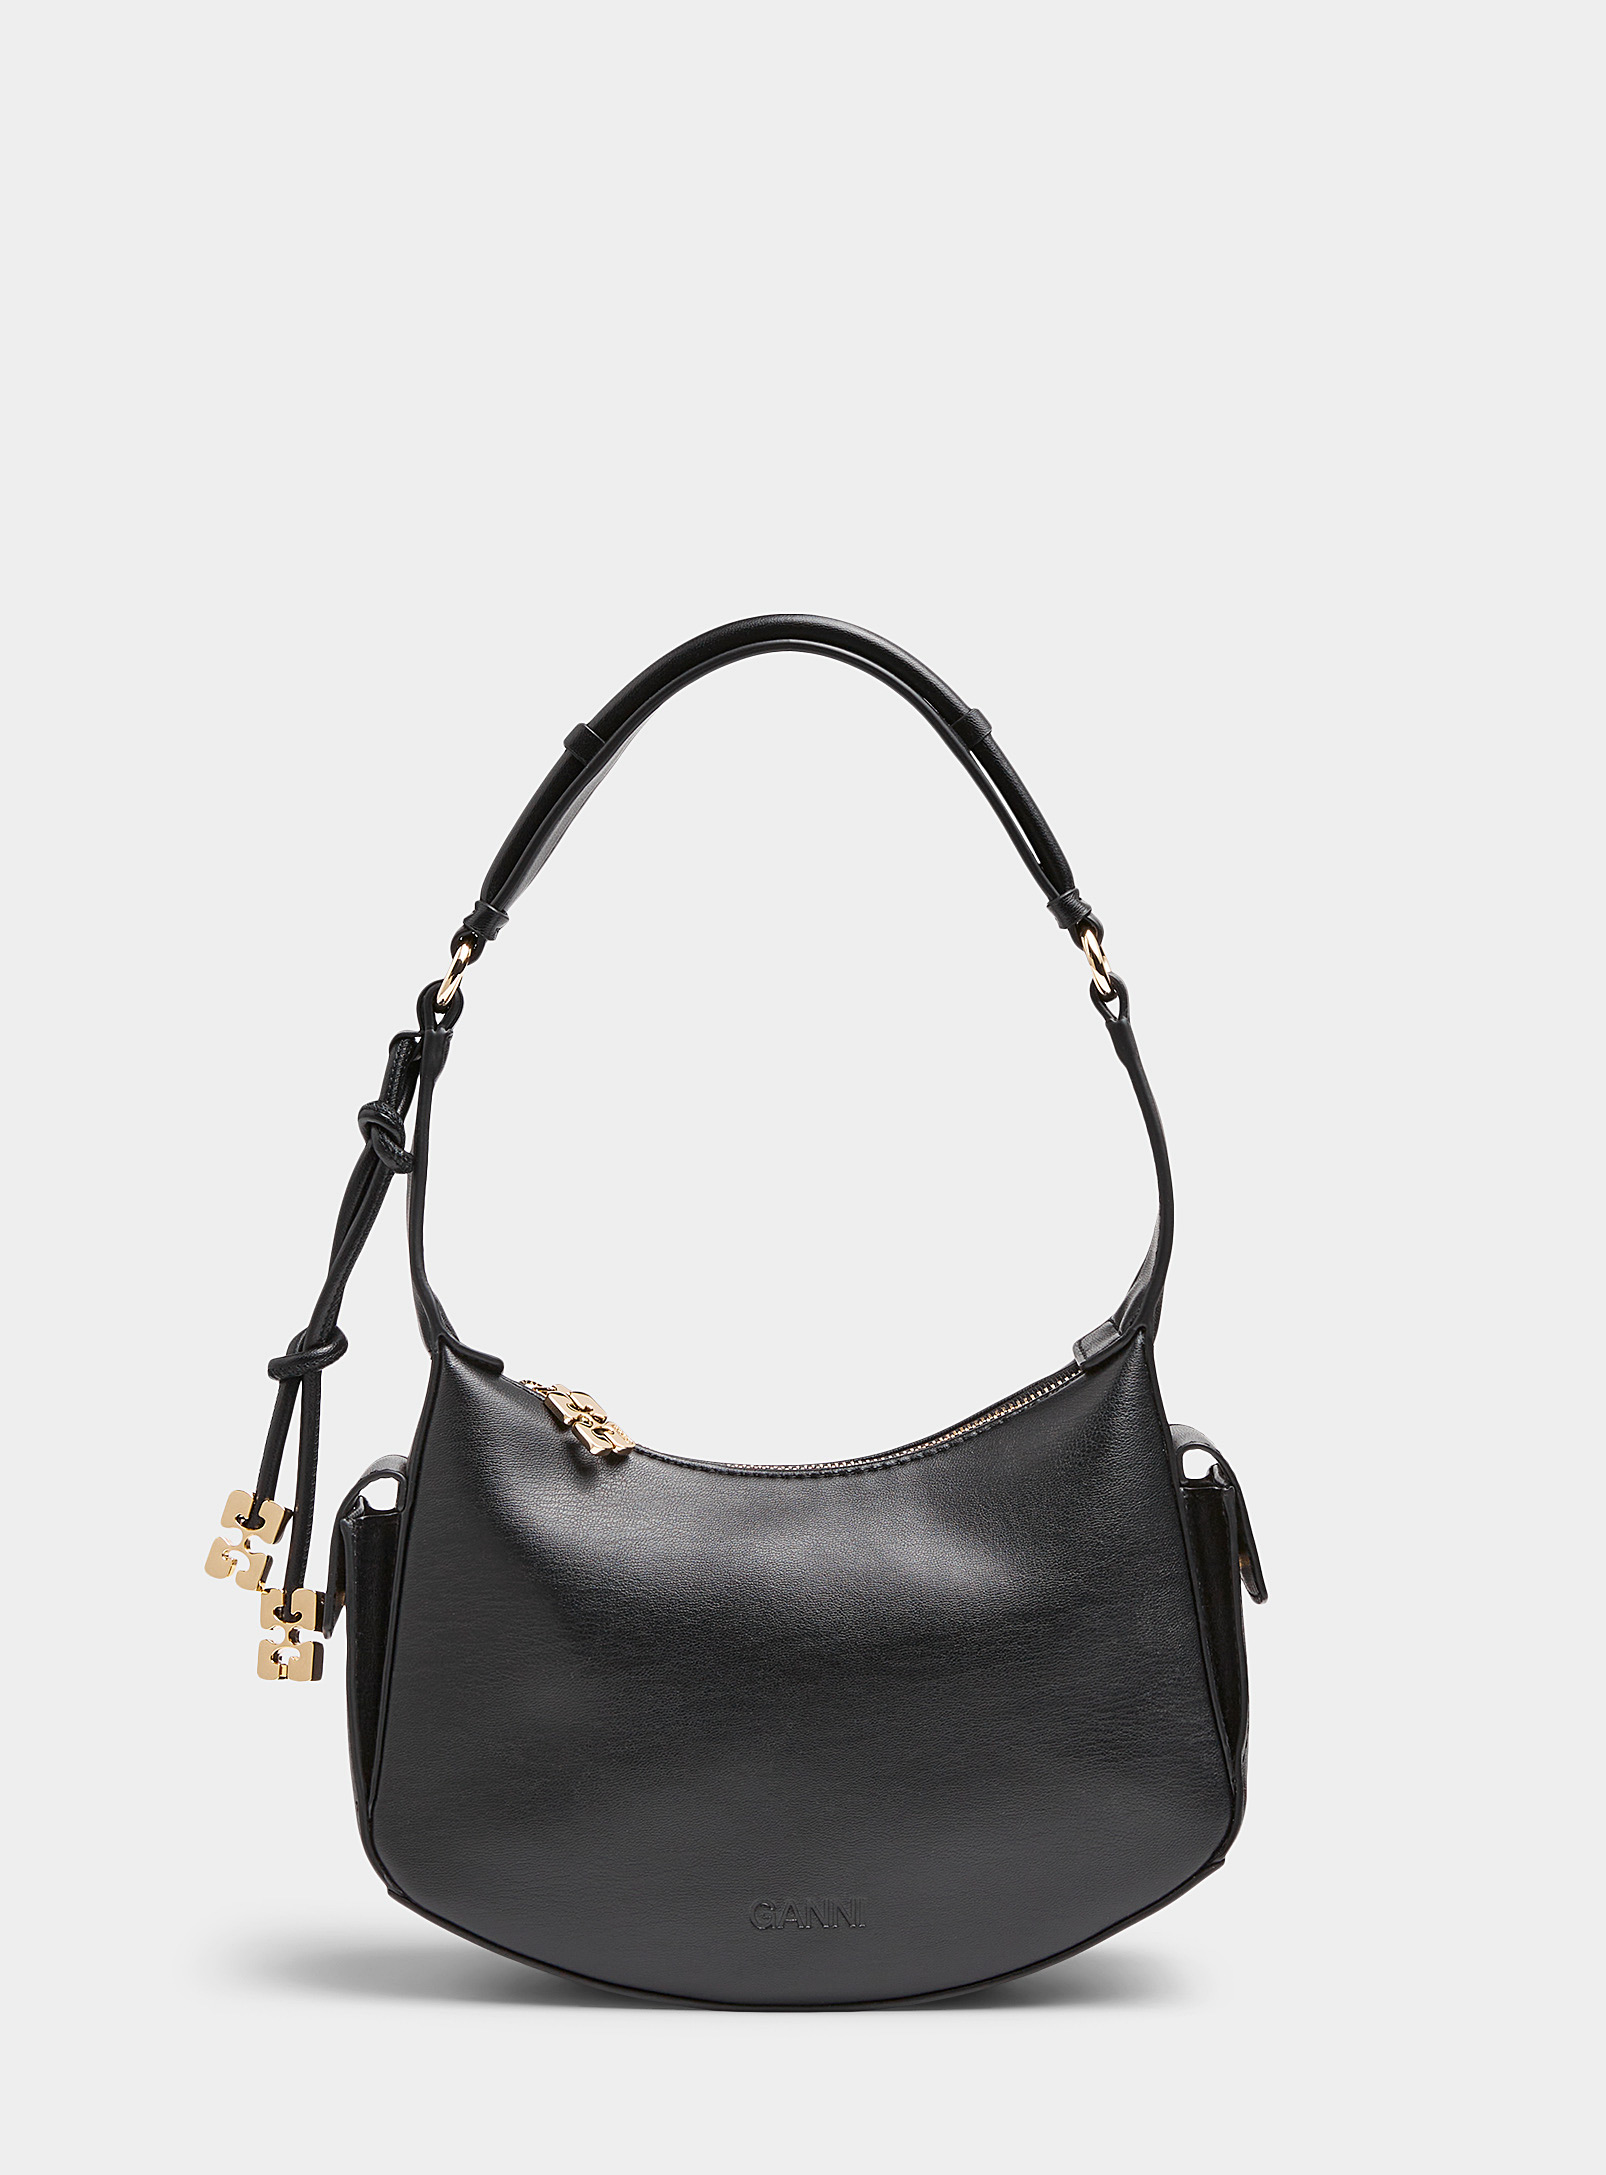 Ganni - Women's Side pockets recycled leather bag